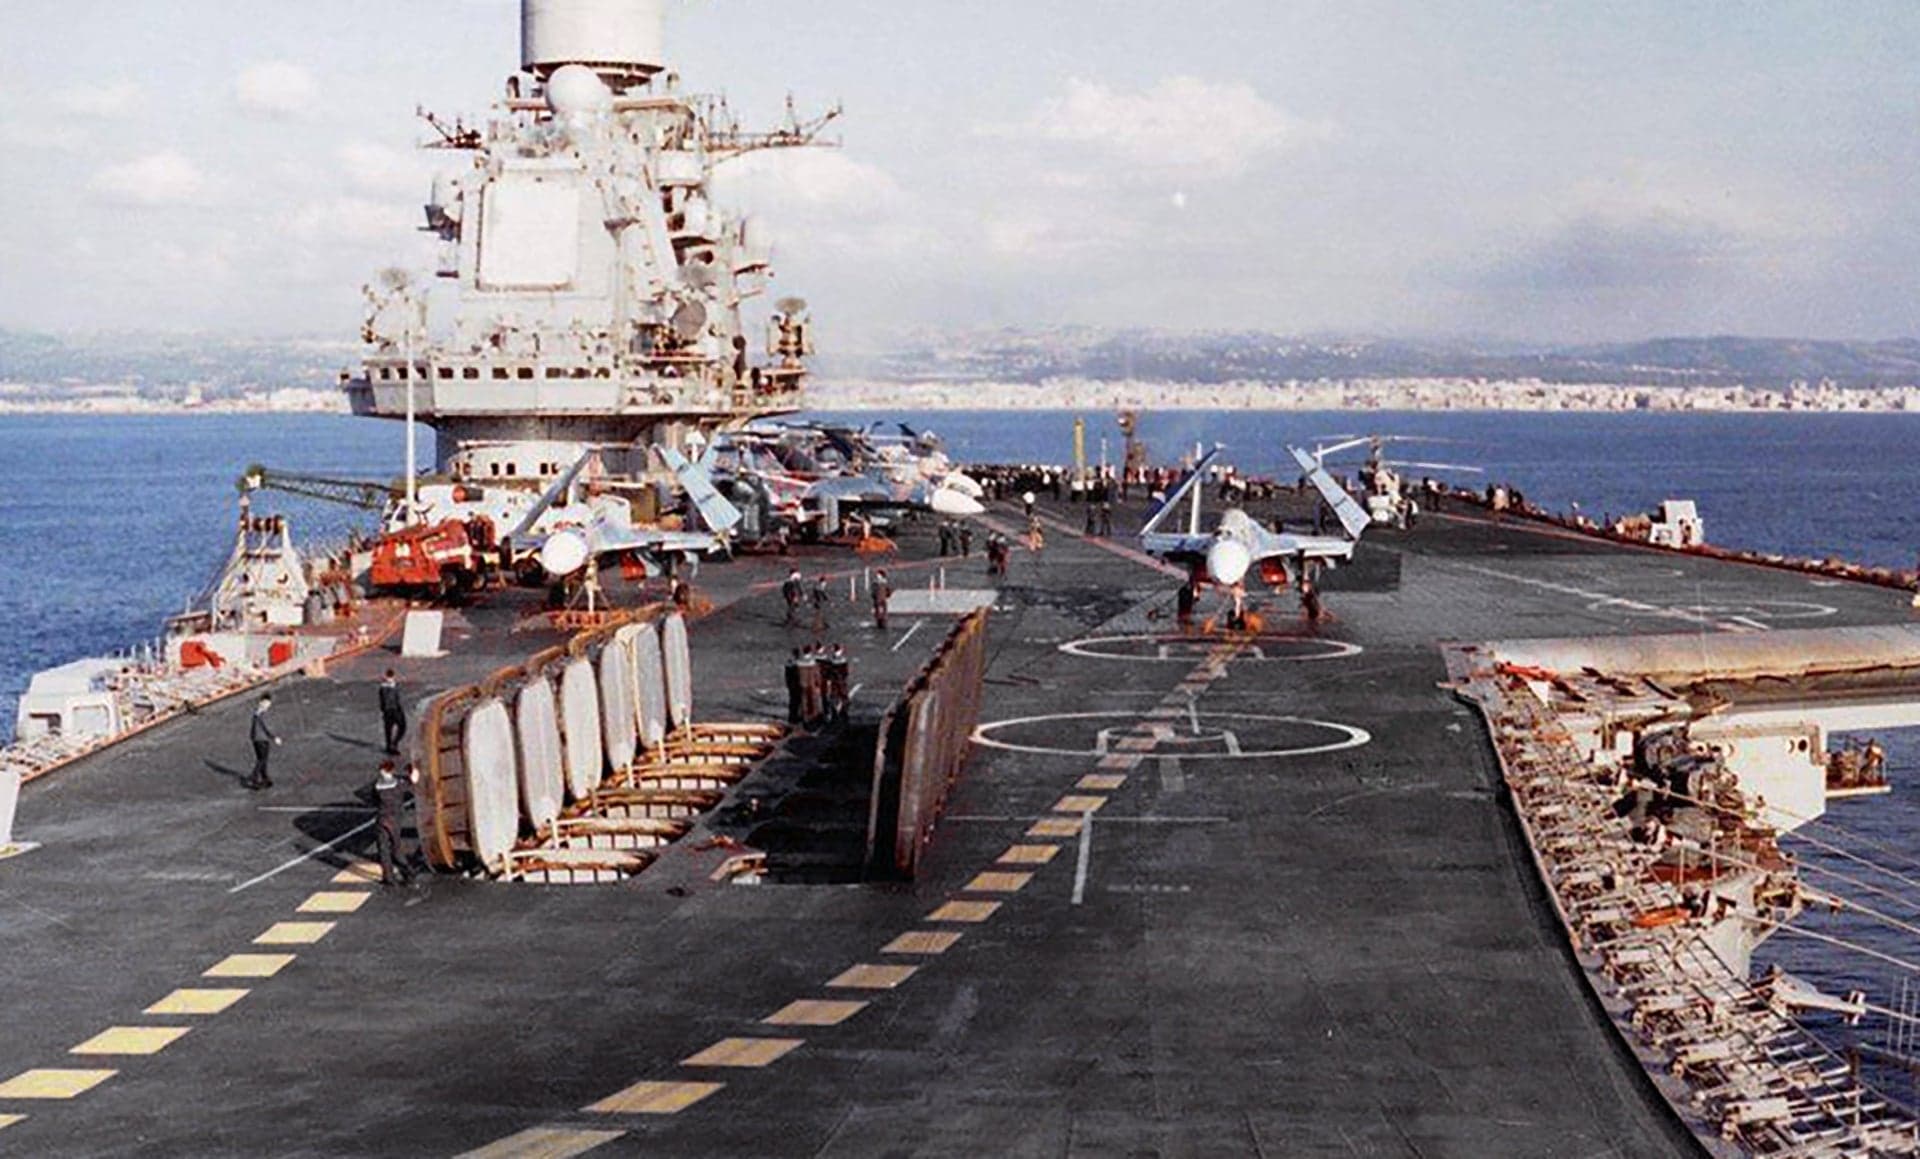 Russia’s Carrier Was Designed To Be Heavily Armed Even Without Its Air Wing